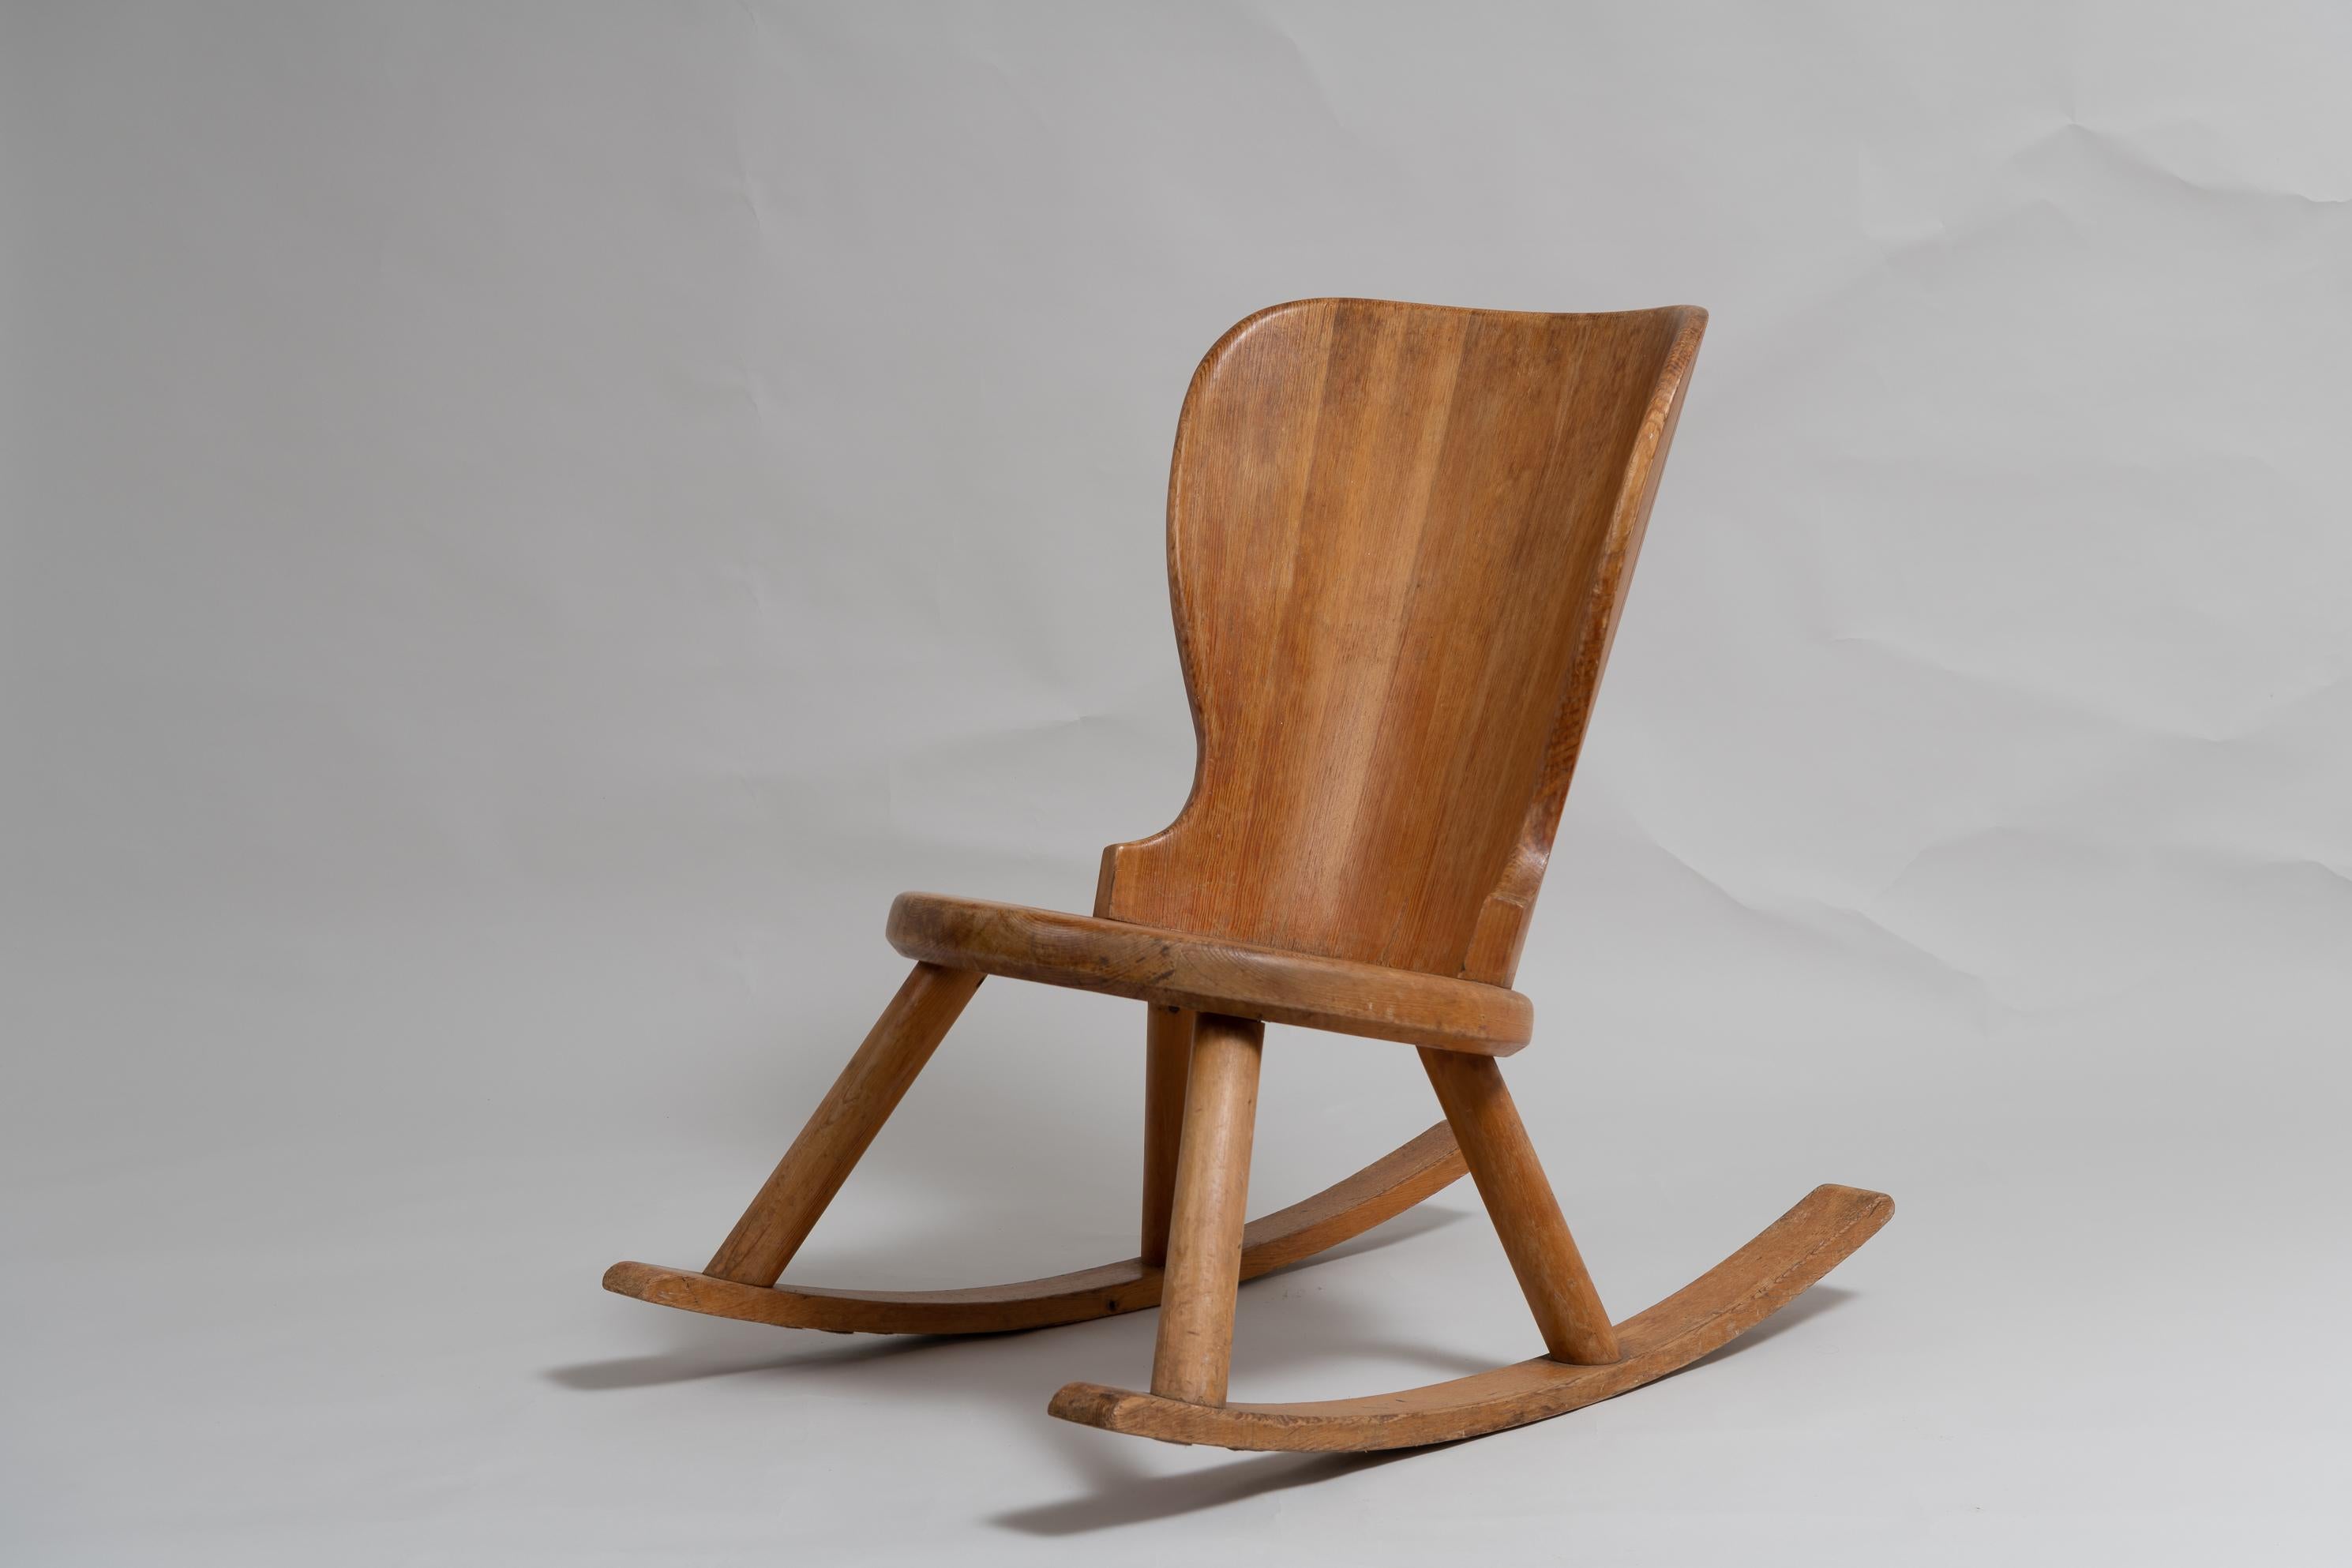 Swedish hand-made pine rocking chair in the style of Axel Einar Hjorts furniture. The rocking chair is in good vintage condition consistent with the age and has minor traces of use. Typical example of the Scandinavian Modern style with elegant lines